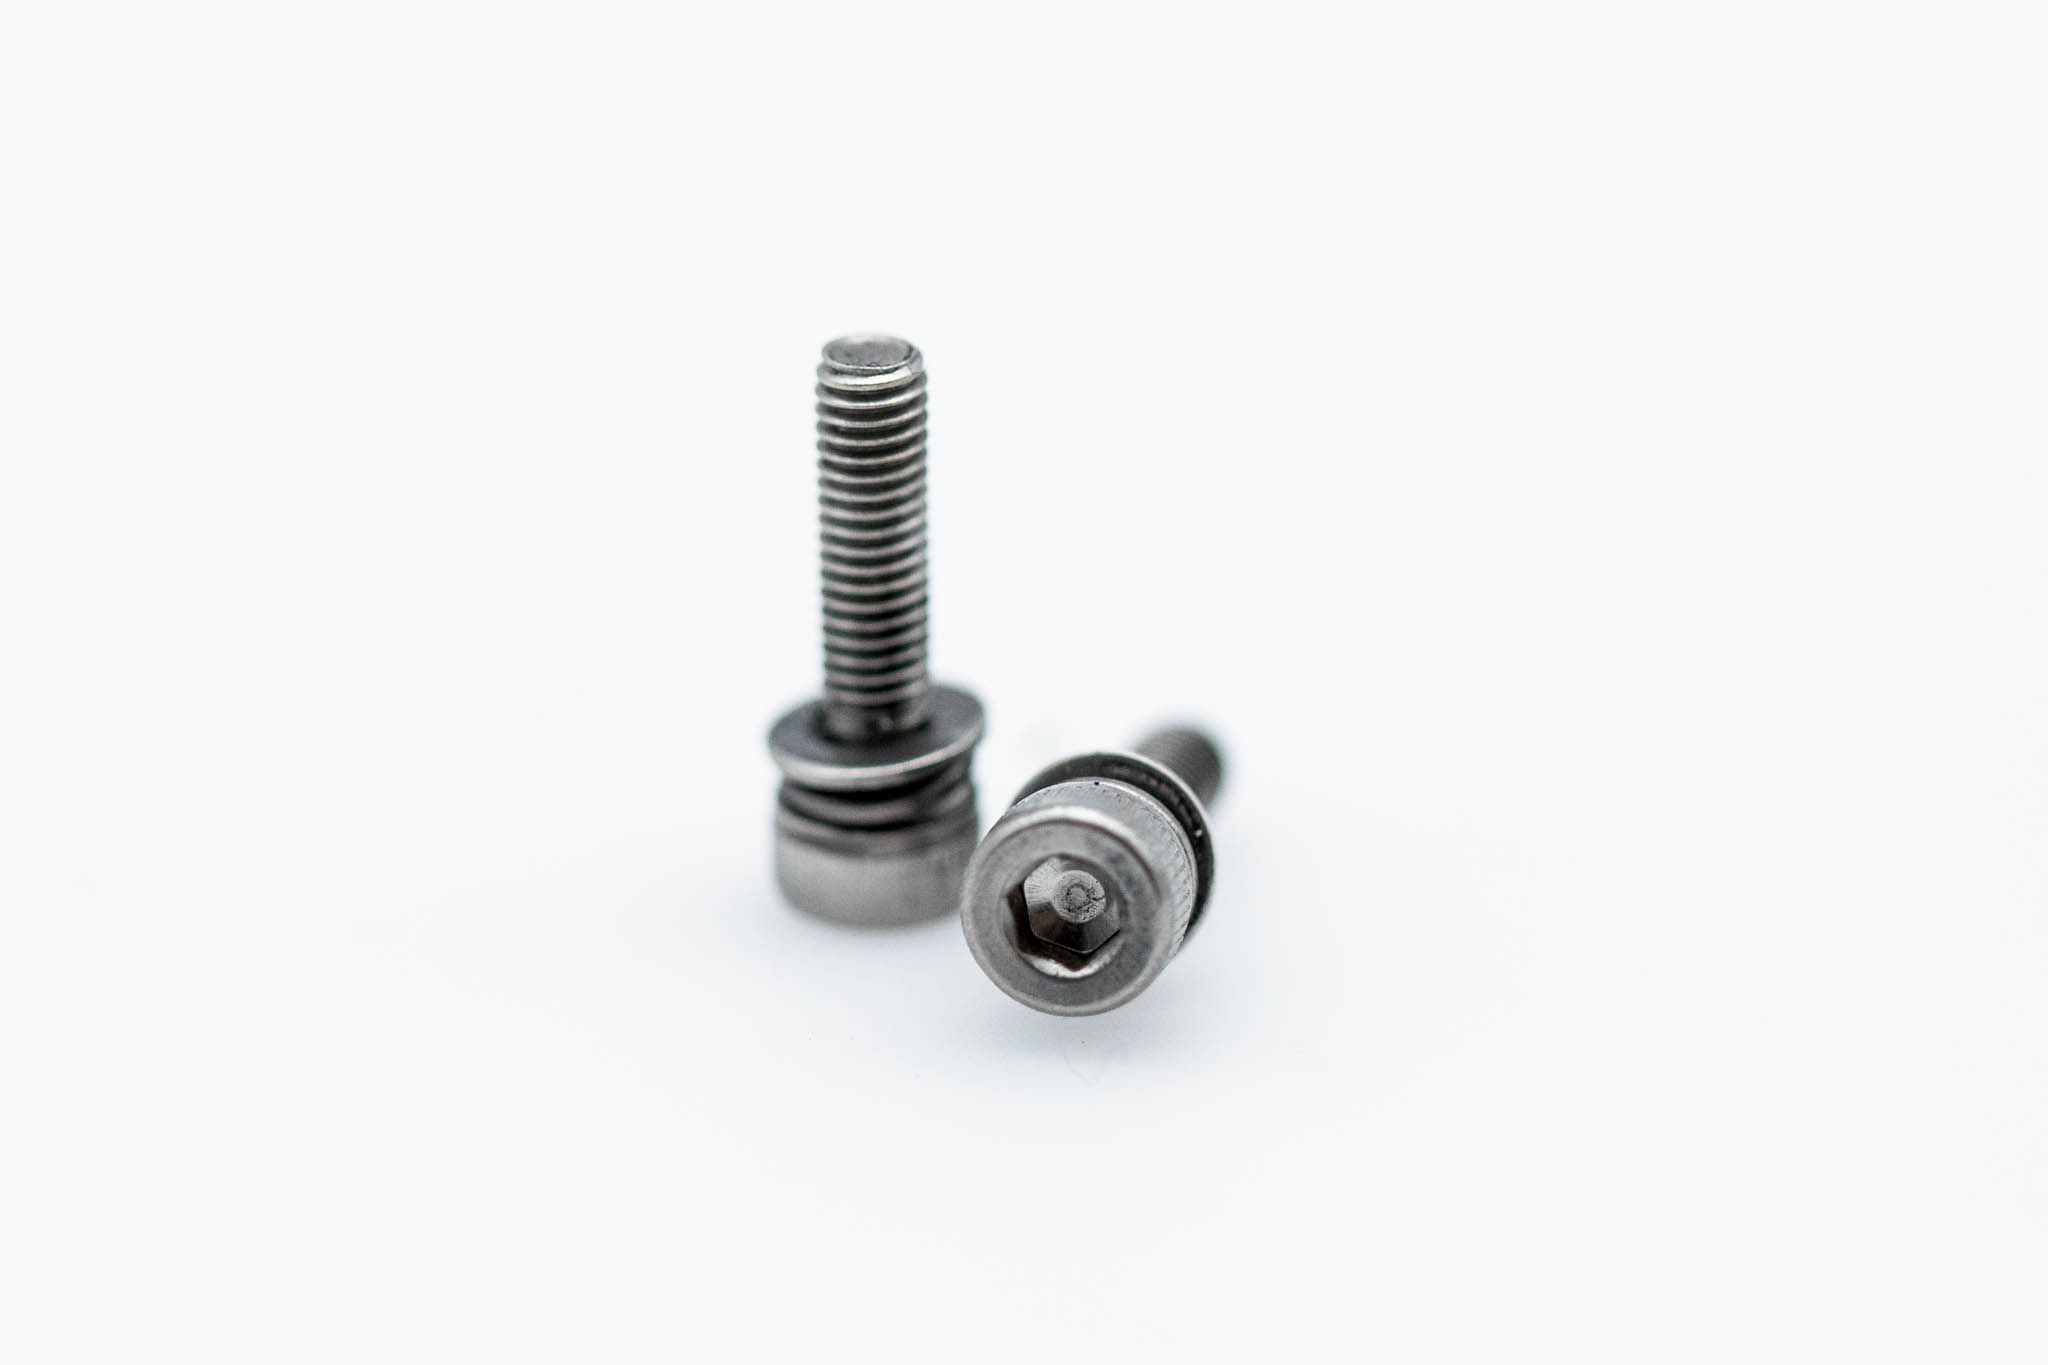 OEM Screw: Headswitch Button Piston Unit - BF-H190, BF-Q190, BF-P190, BF-1TH190, BF-XP190